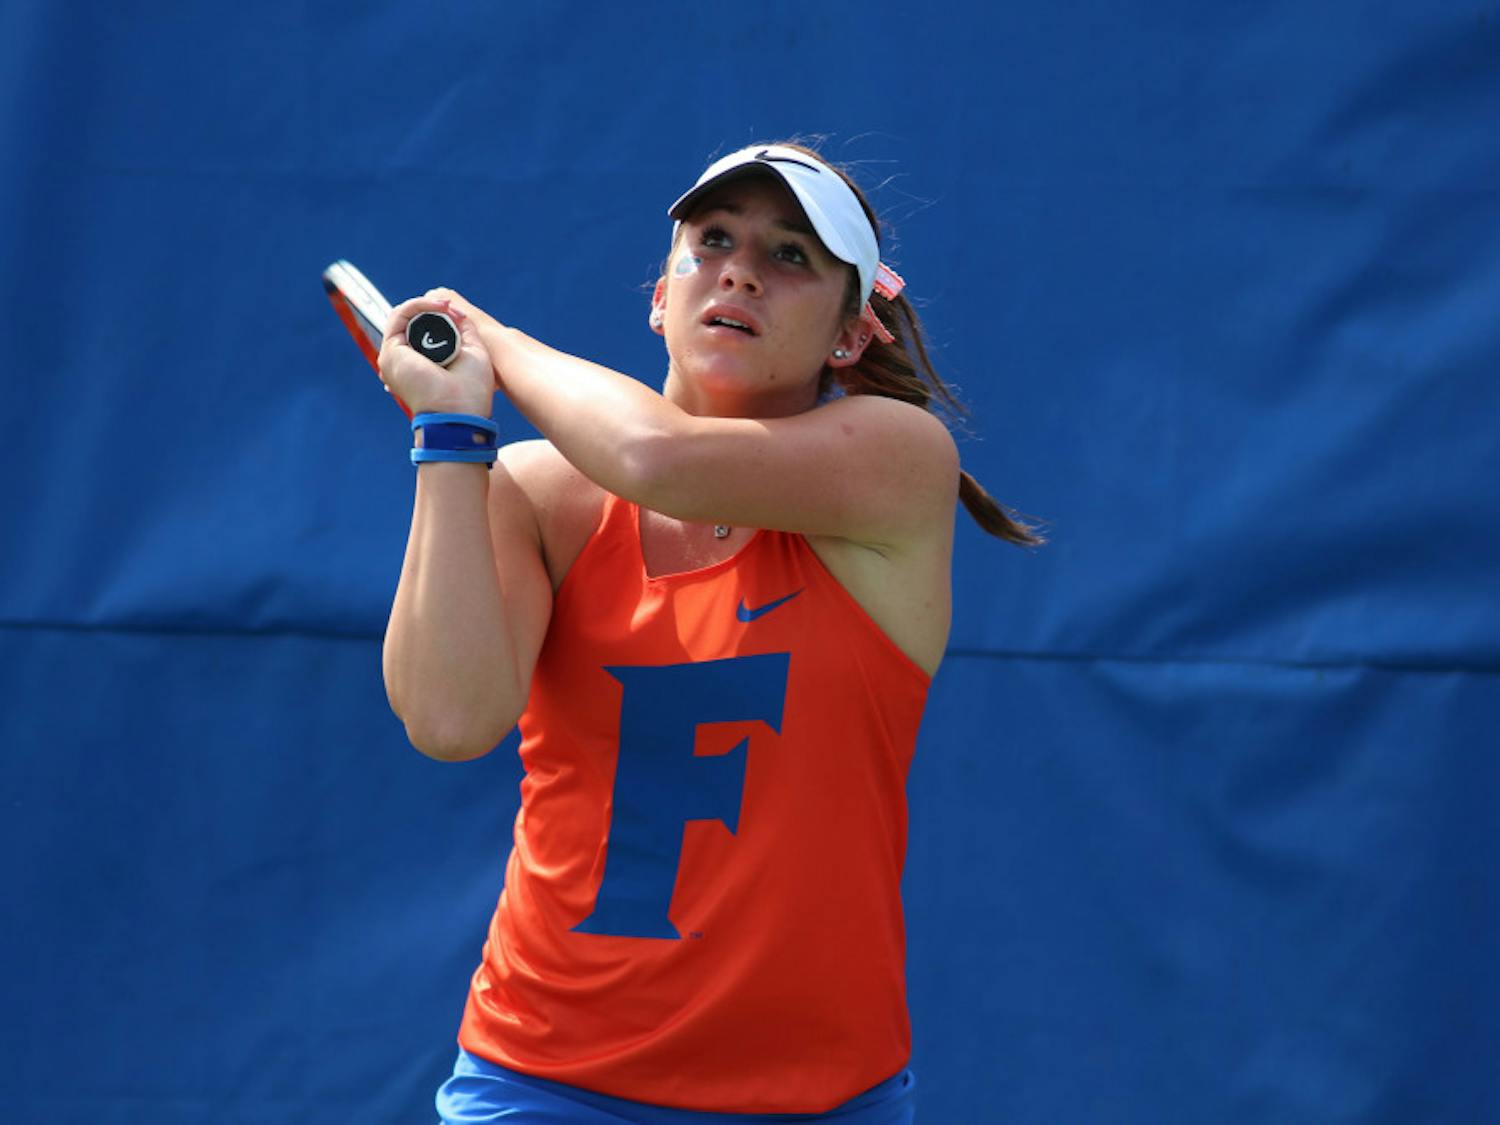 Sophomore Victoria Emma (pictured) and her doubles partner, junior Tsveta Dimitrova, lost narrowly (8-7) to the tournament's No. 1 seed of Southern California's Angela Kulikov and Rianna Valdes, eliminating them from the ITA All-American Championships. Emma later took victory in the tournament's singles back draw. 